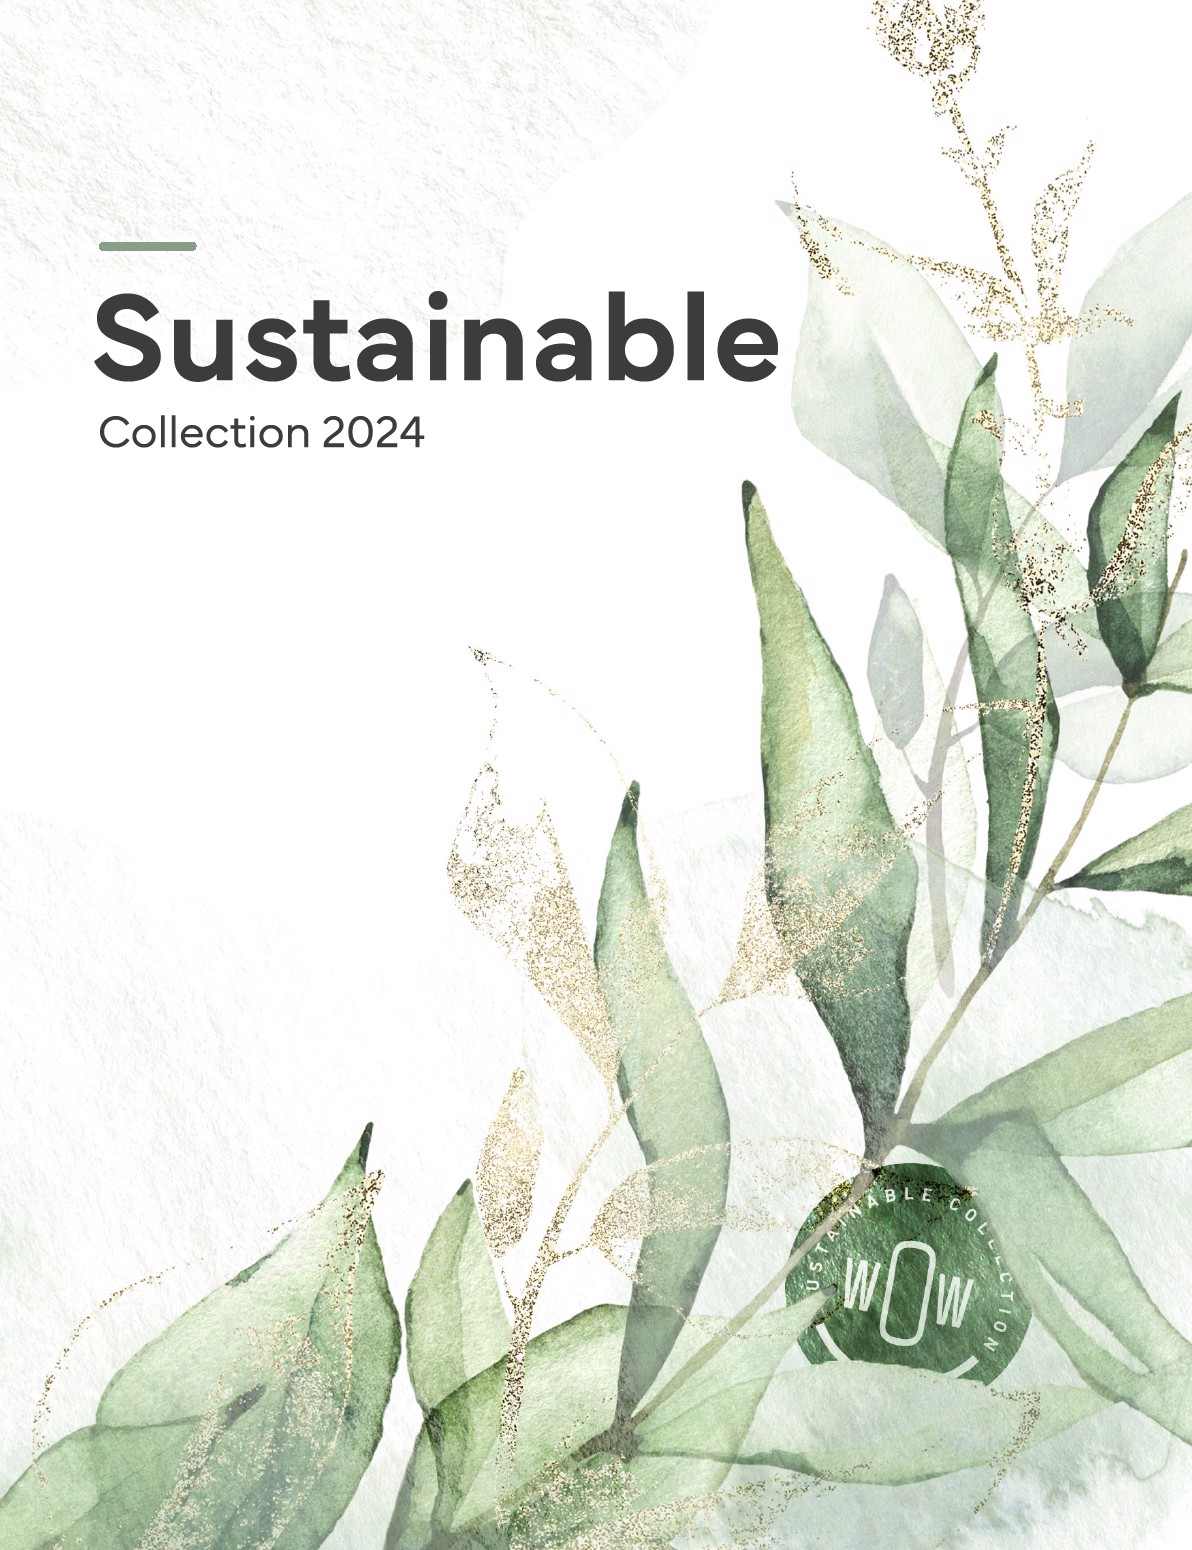 Sustainable Collection 2024 - WOW